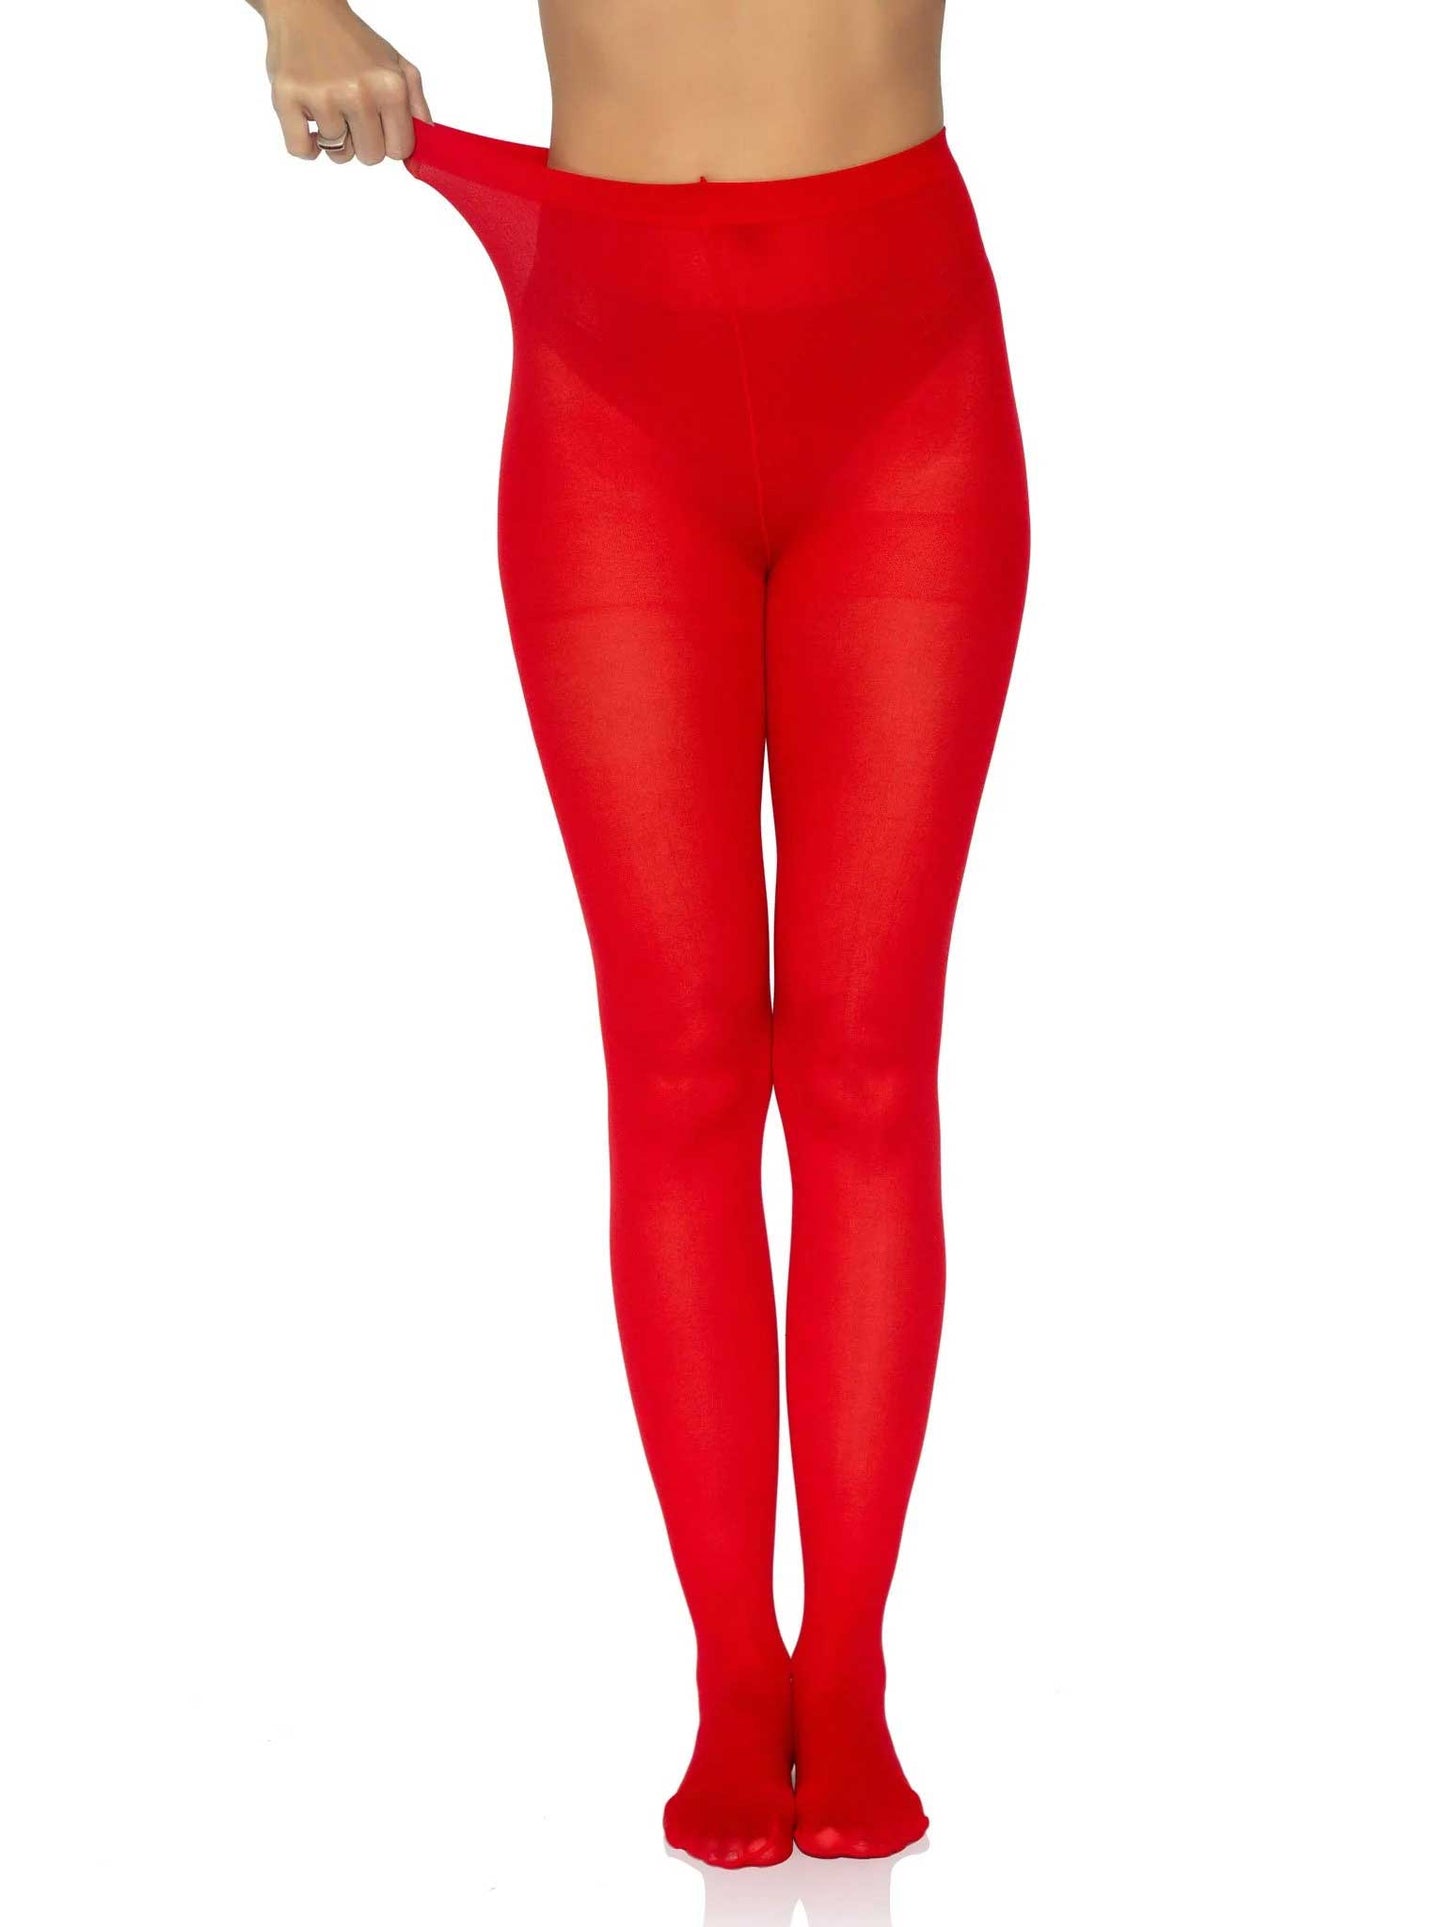 Nylon Tights - One Size - Red